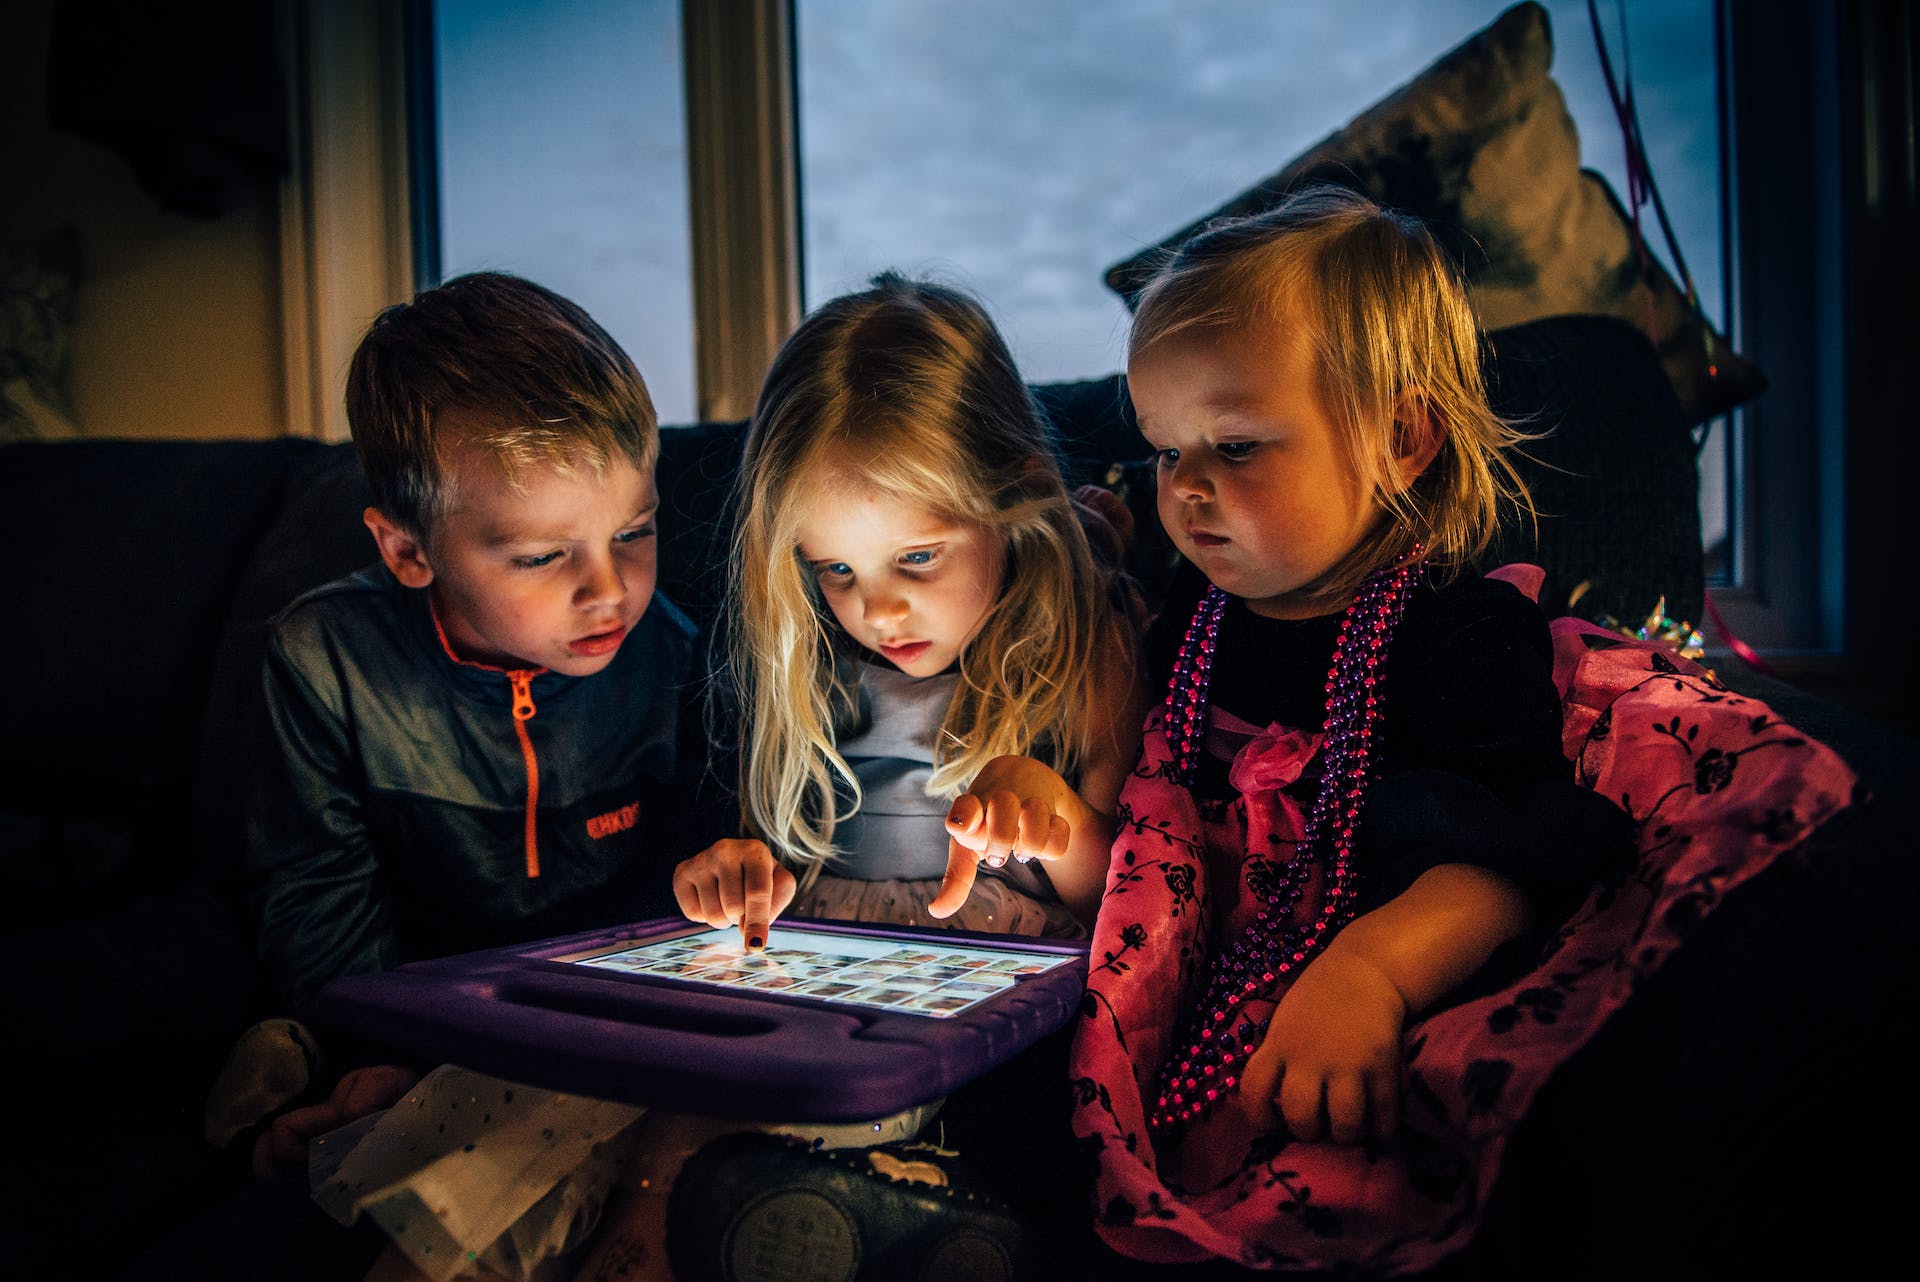 Three children looking at a tablet | Source: Pexels